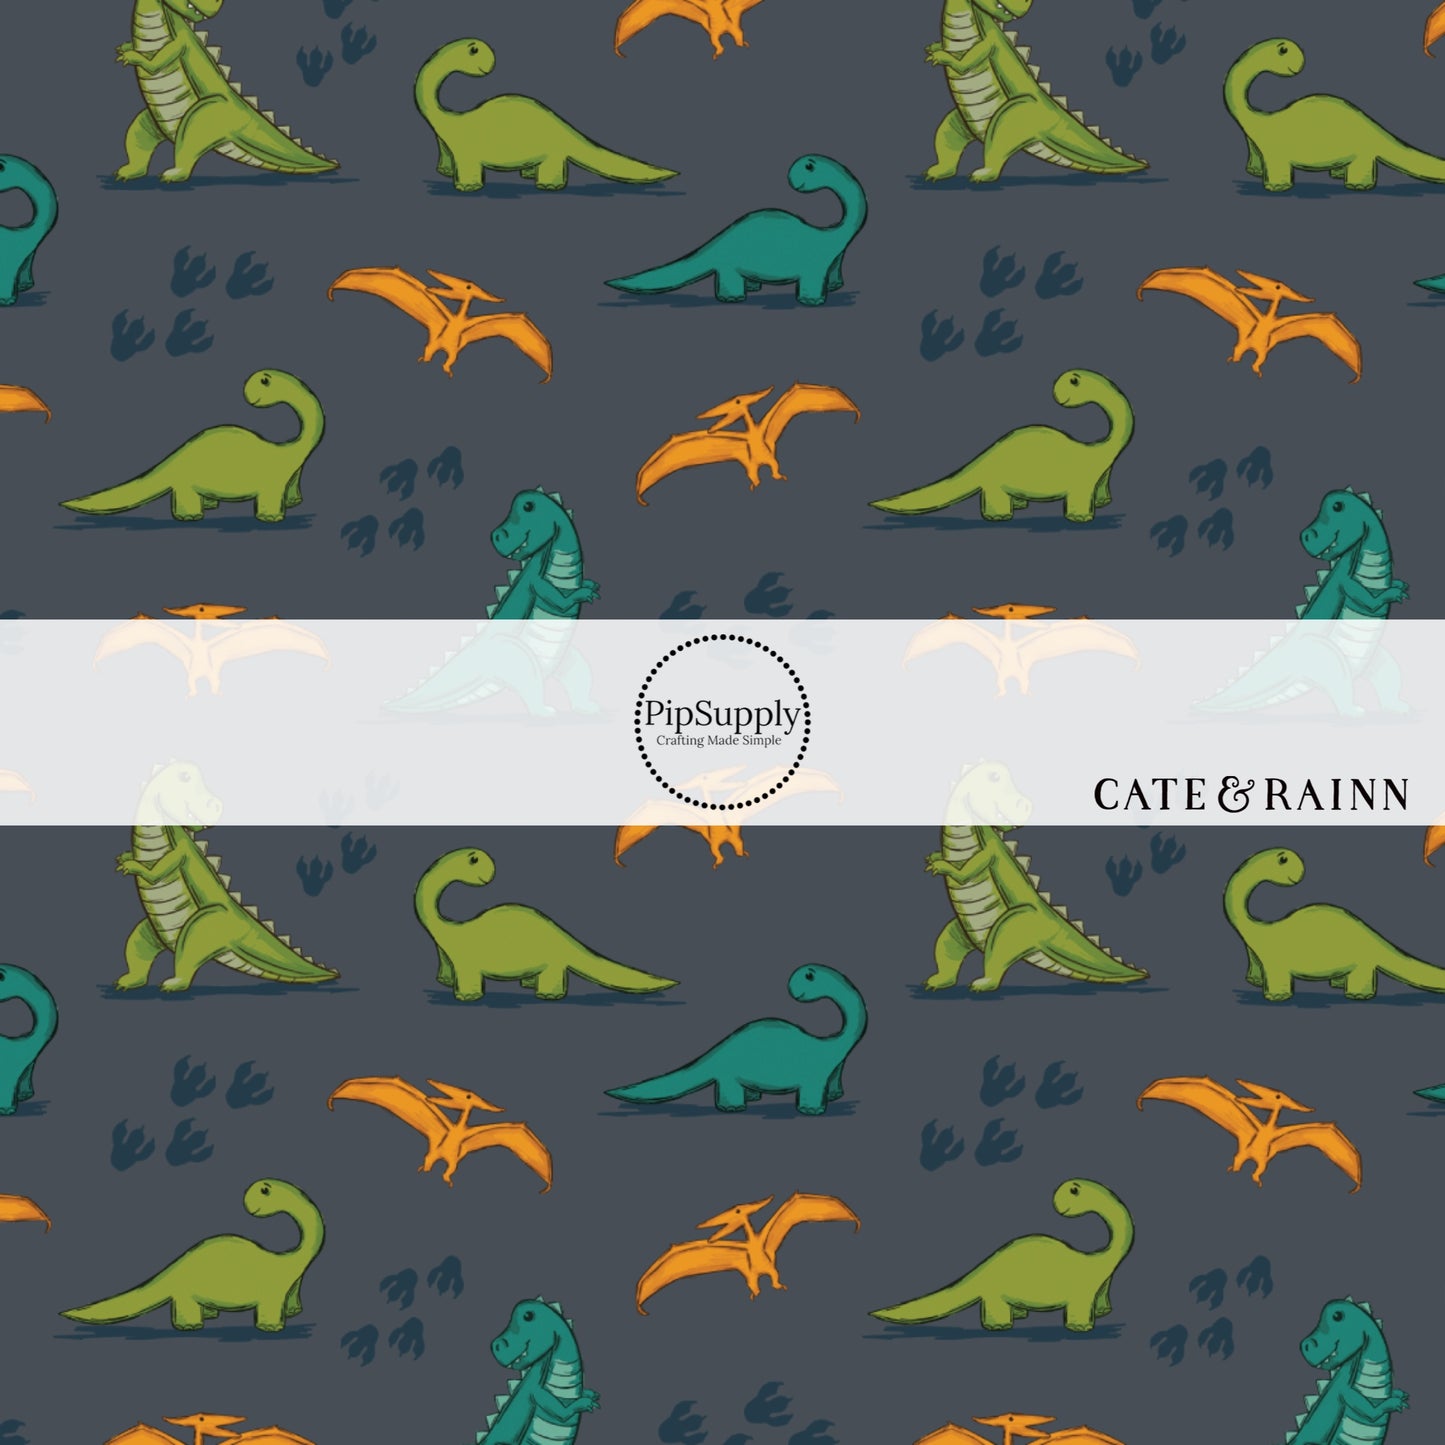 Dinosaur tracks with green, orange, and teal dinos on charcoal bow strips